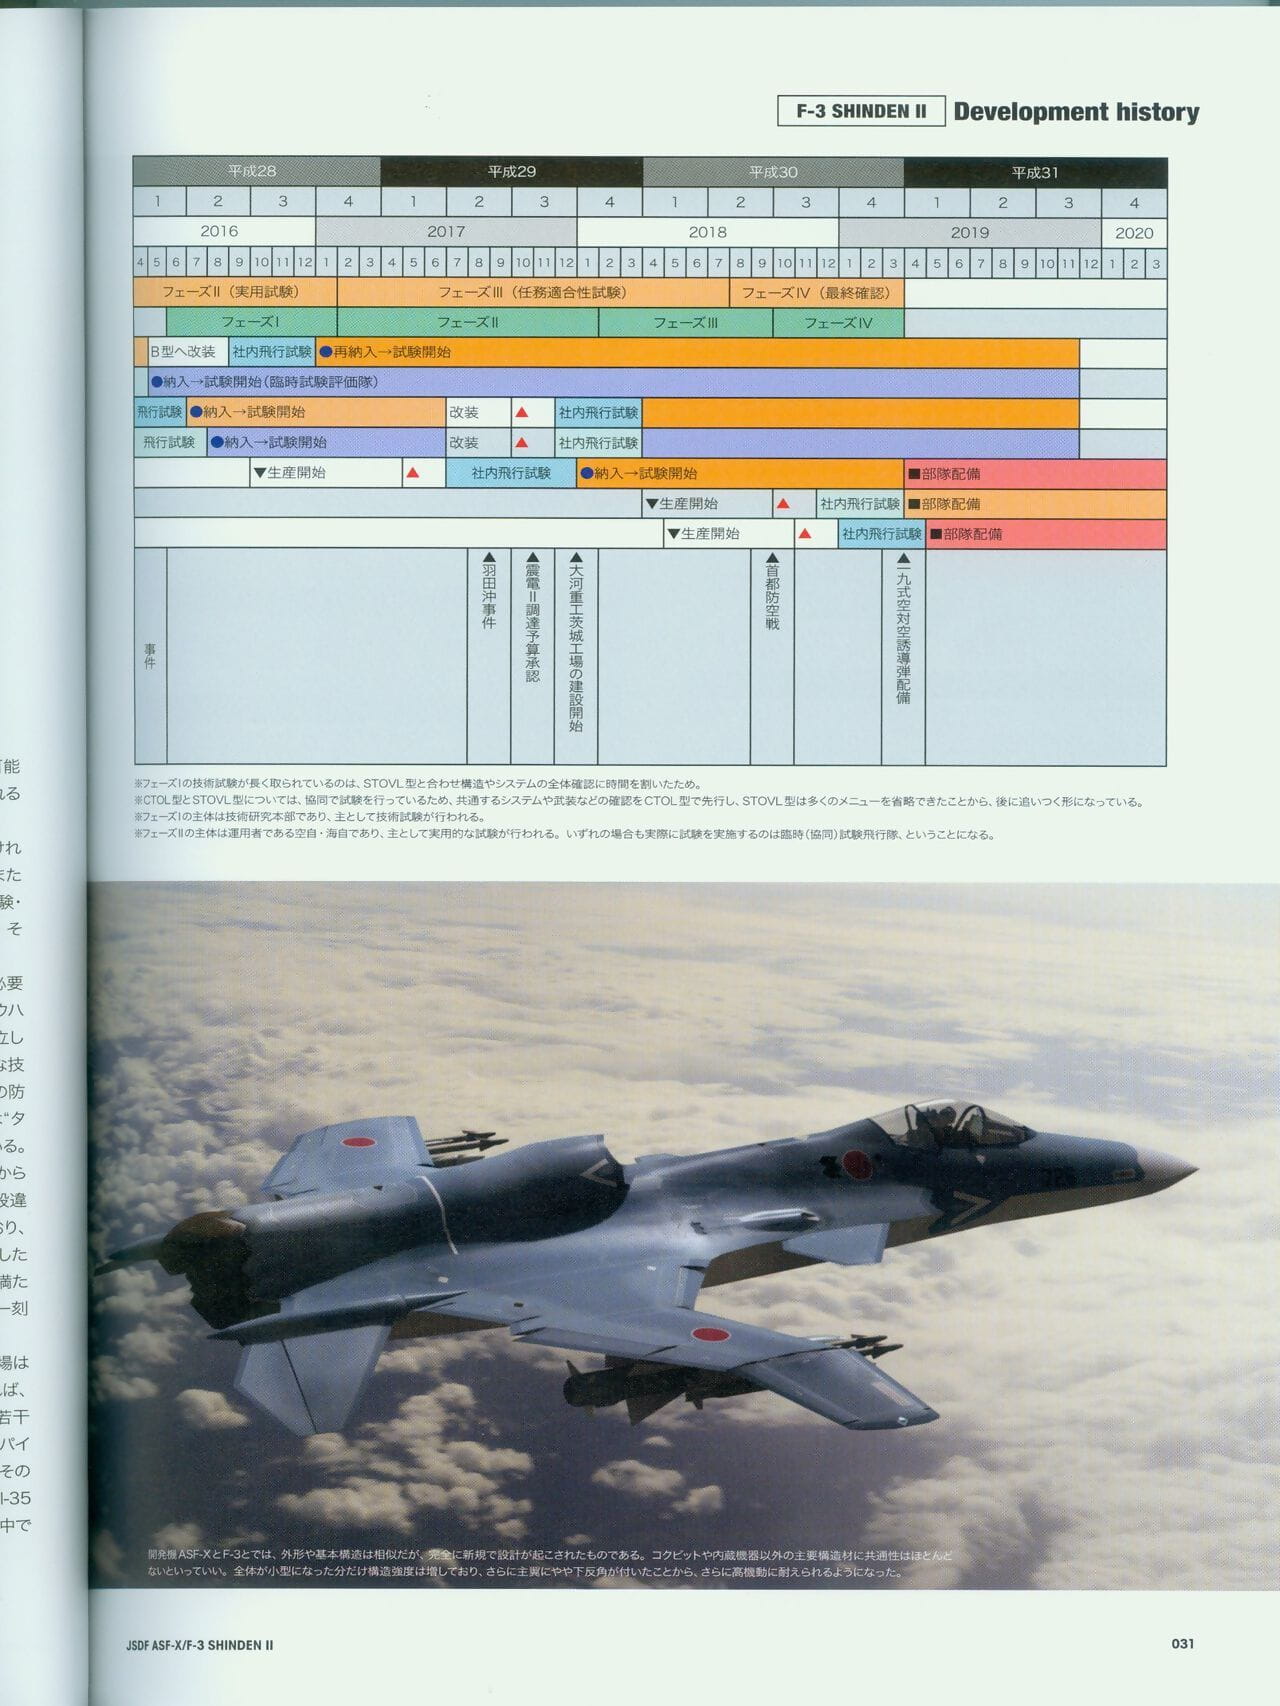 Potter Exercise Aggro Qualifications Old hand Pass round ASF-X SHINDEN II - affixing 2